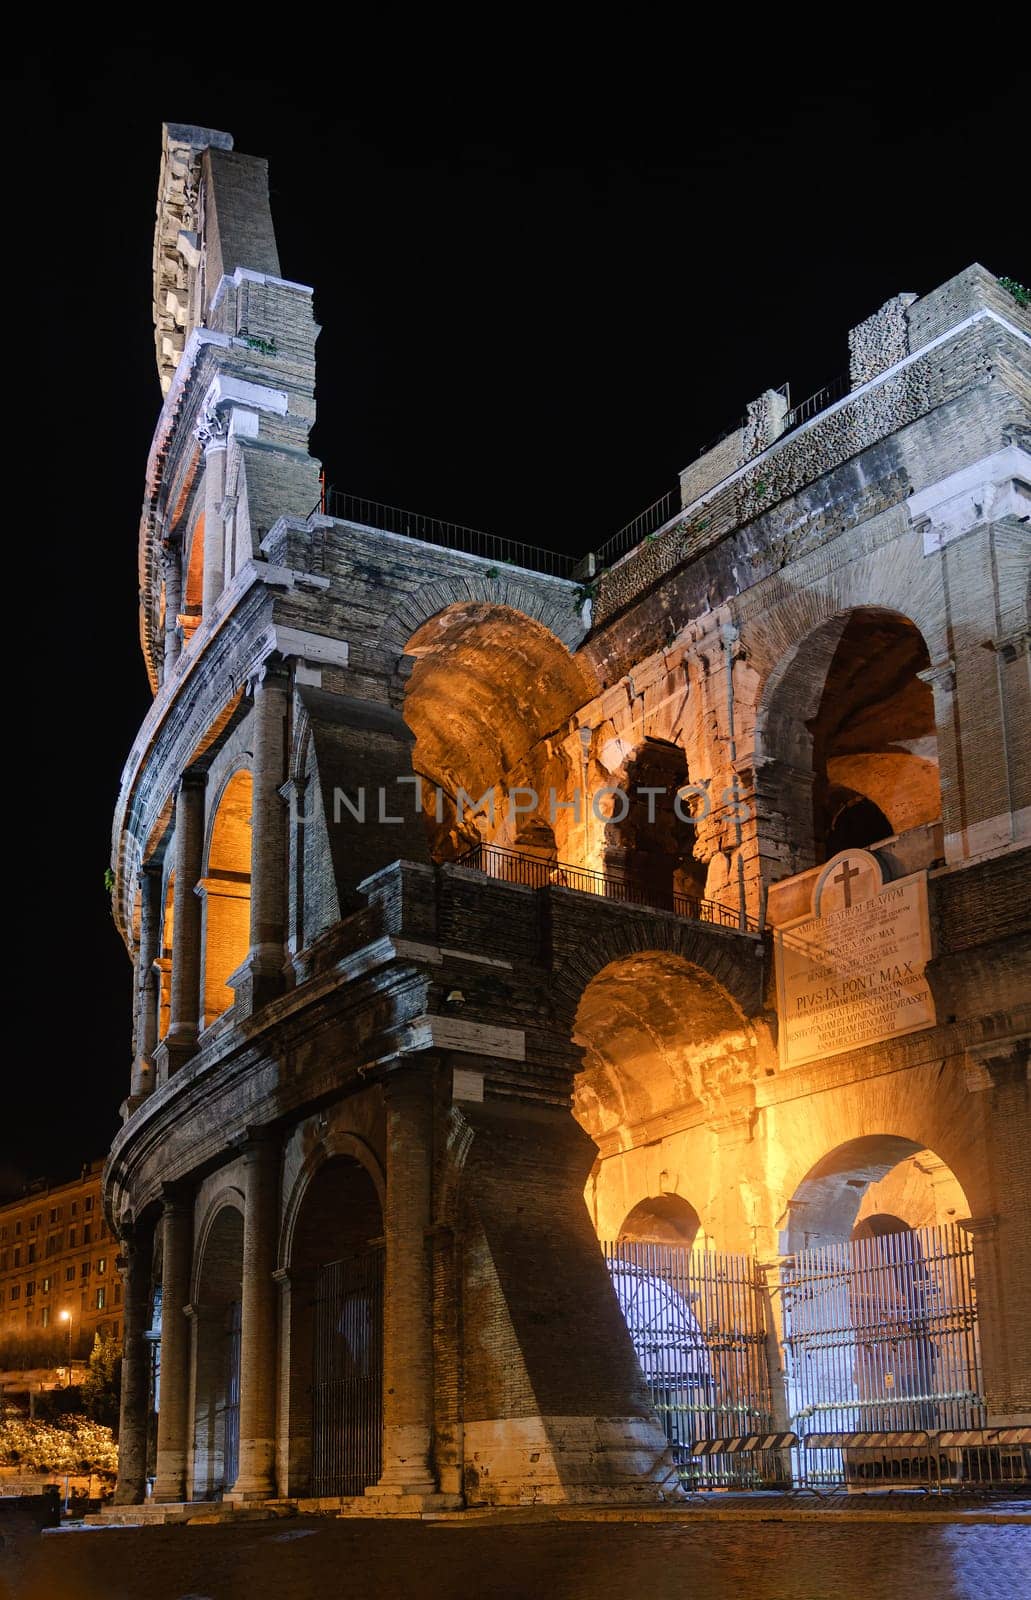 Vertical view of the Colosseum in Rome illuminated at night